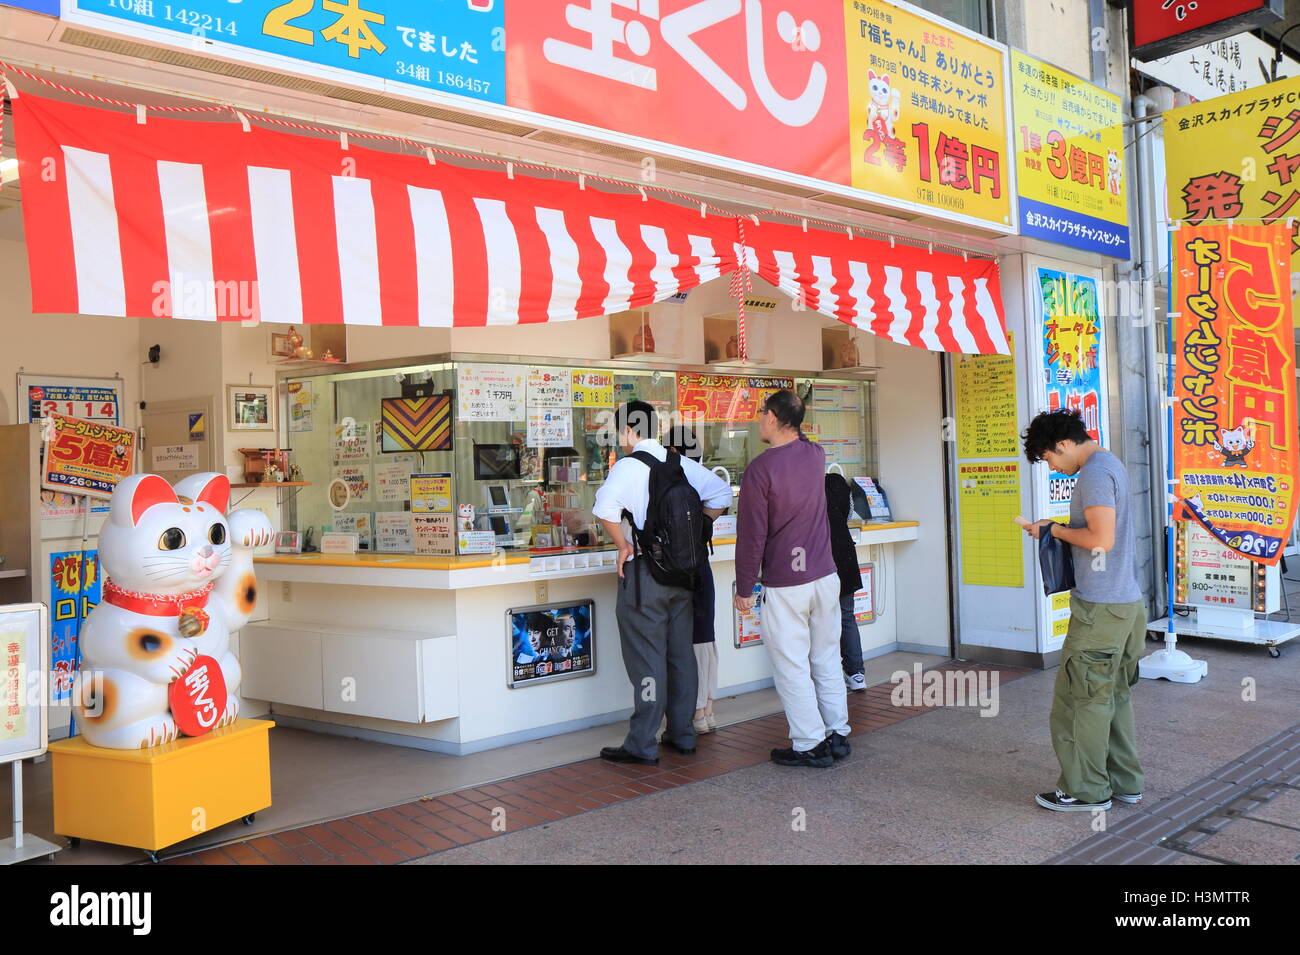 People queue to buy Japanese lottery at a lottery outlet in Kanazawa Japan. Stock Photo